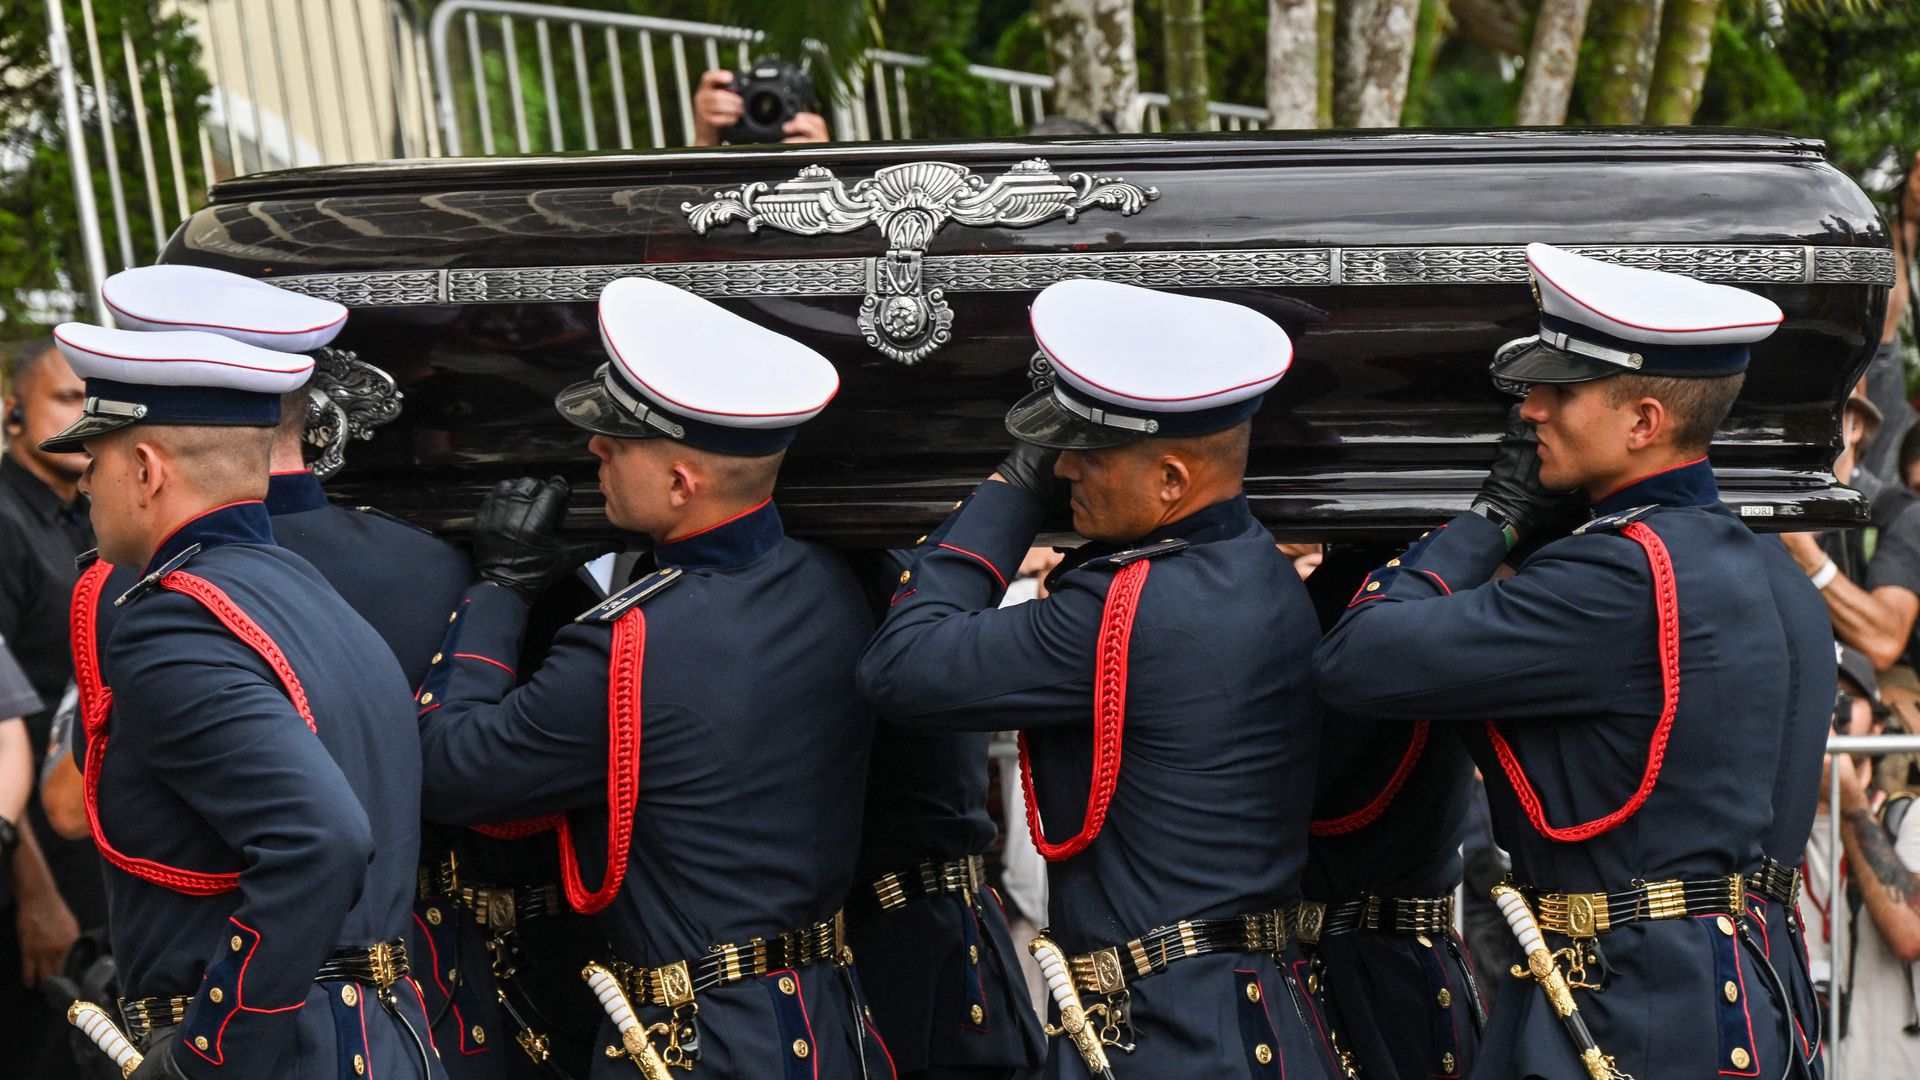 The coffin of the late soccer legend Pelé arrives at a cemetery in Santos, Brazil.